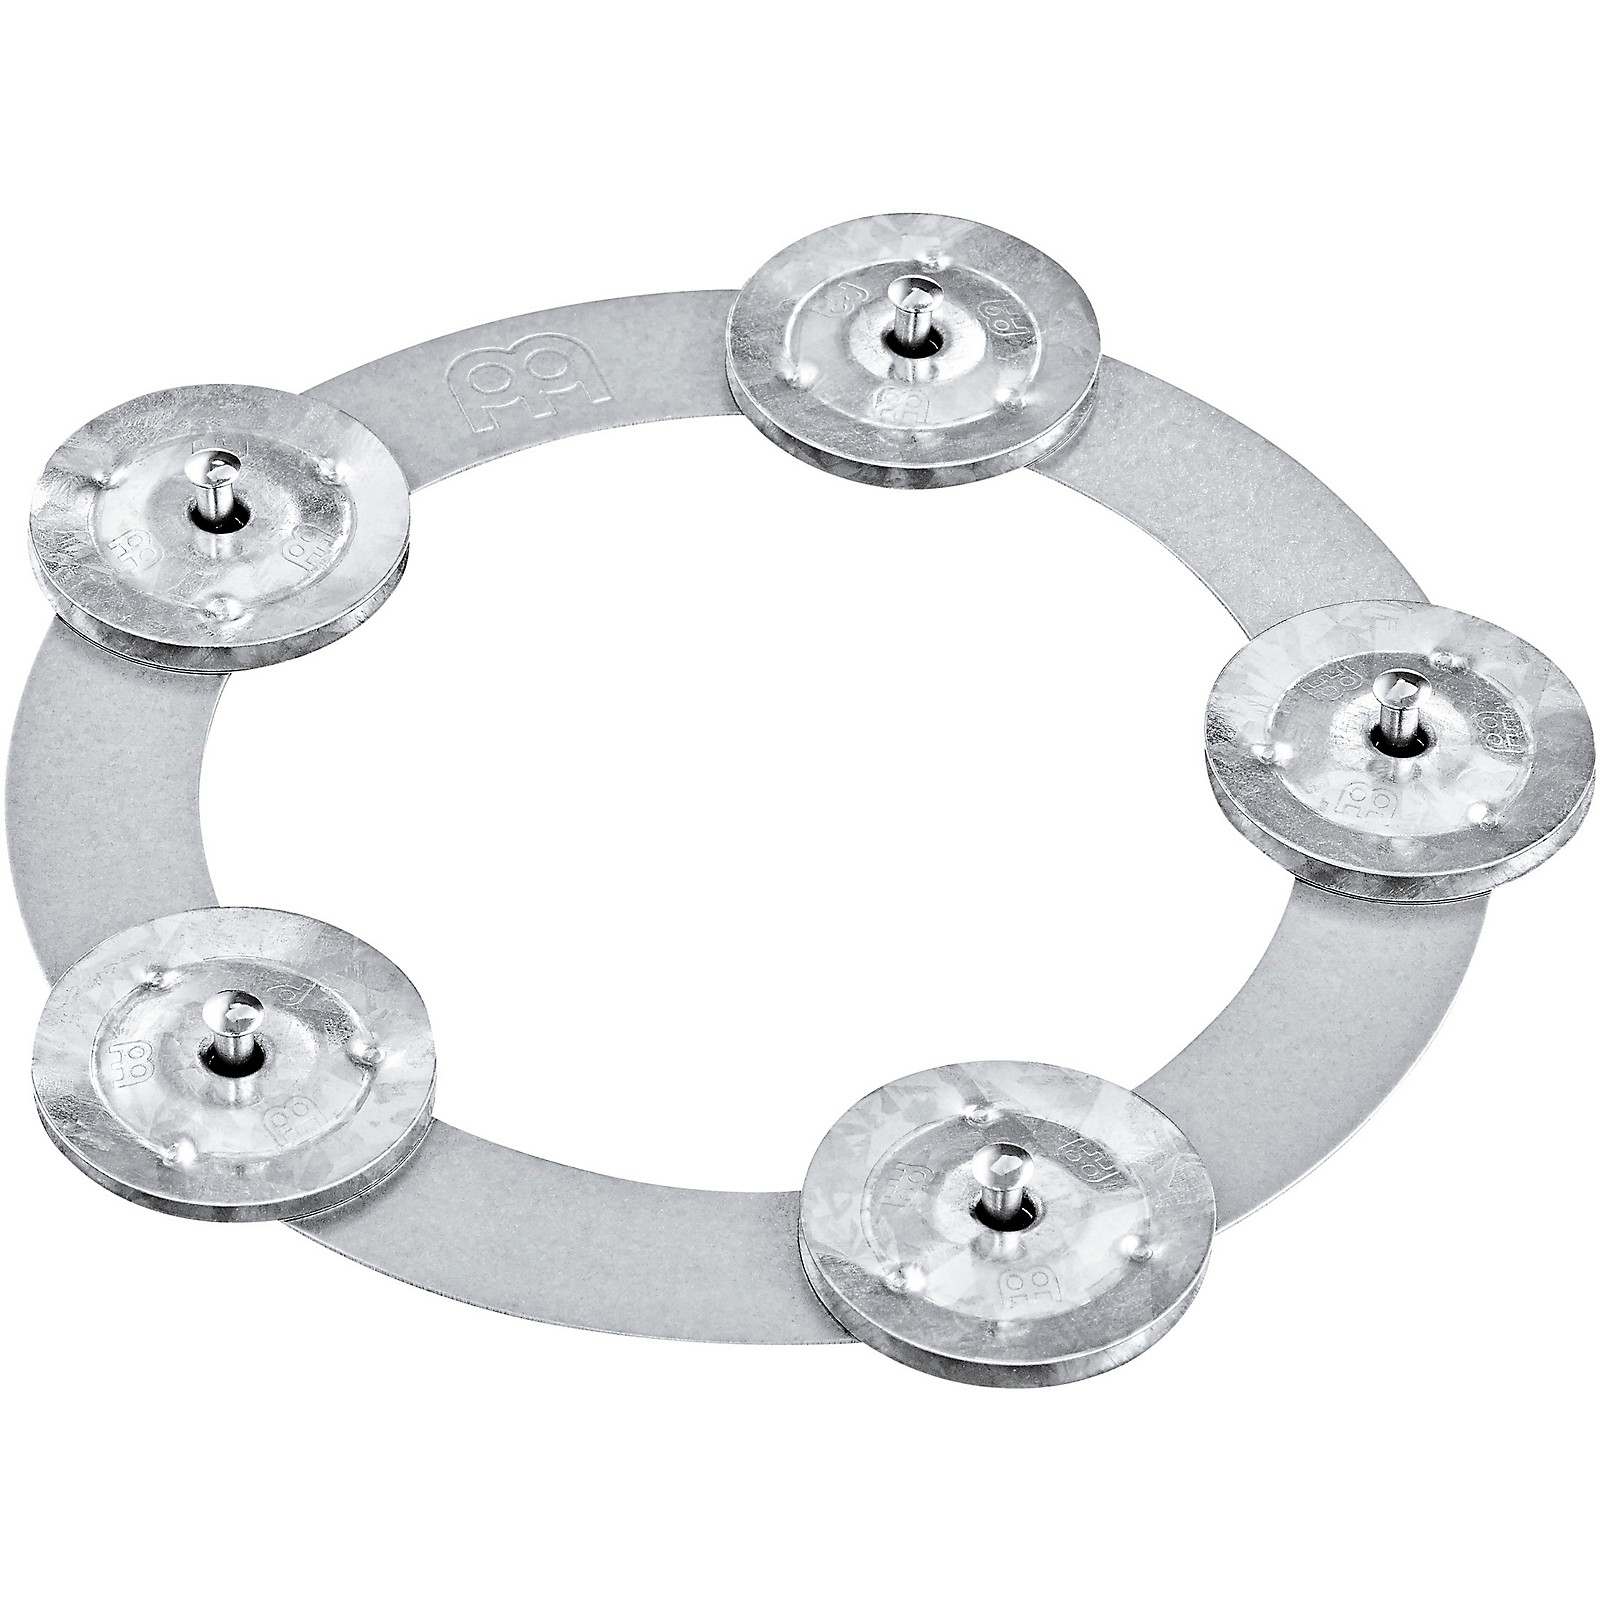 Meinl Dry Ching Ring Jingle Effect for Cymbals | Musician's Friend